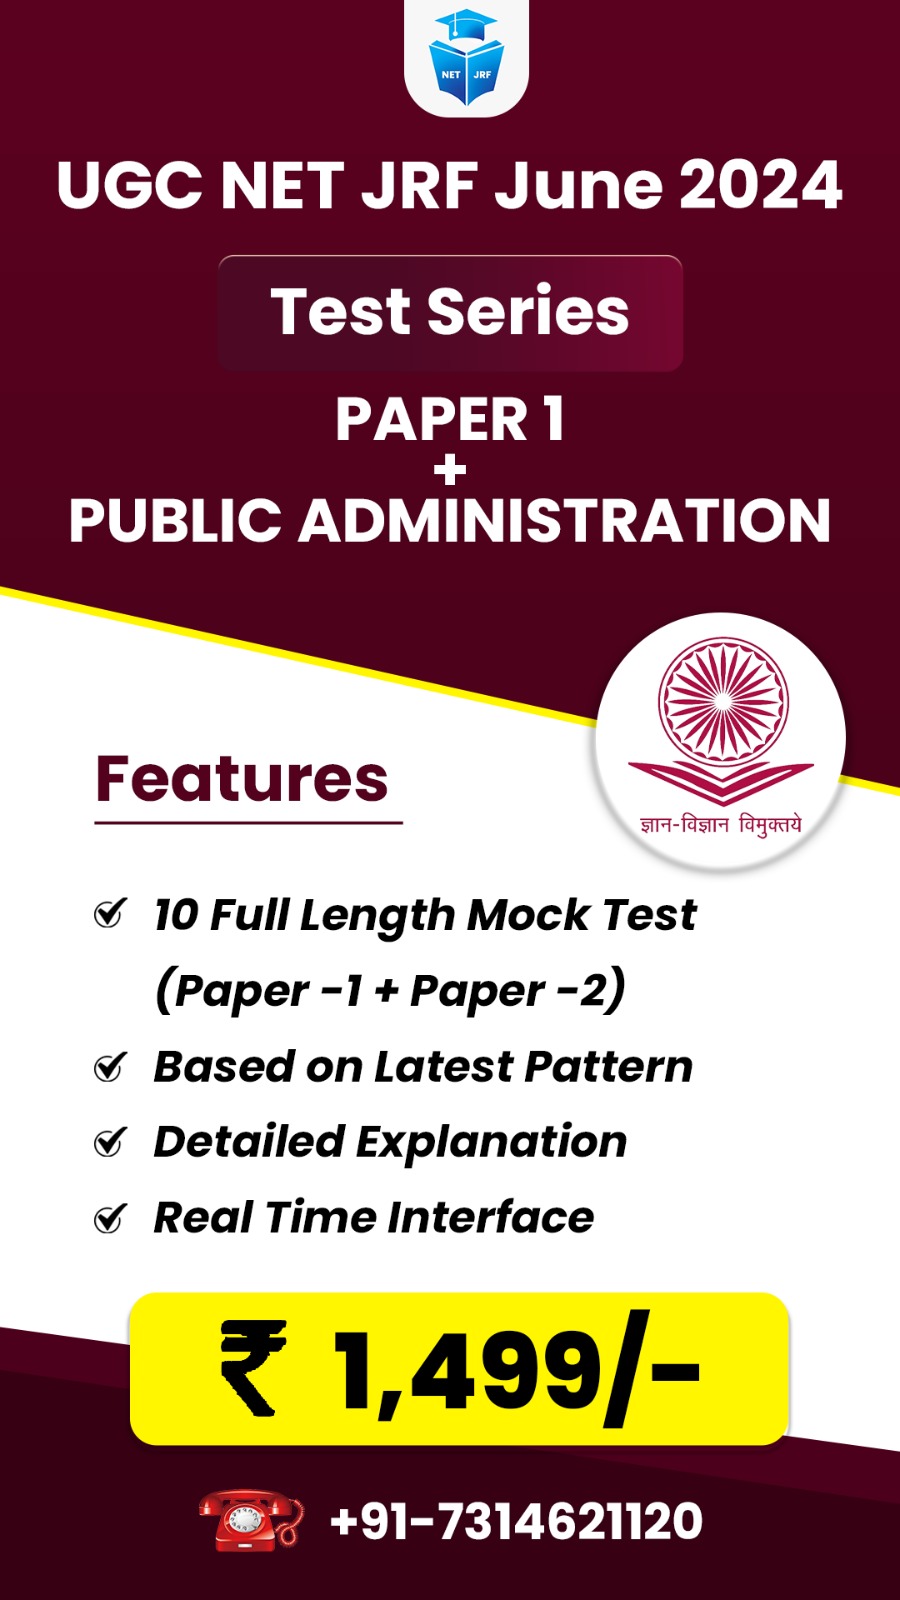 Public Administration (Paper 1 + Paper 2) Test Series for June 2024